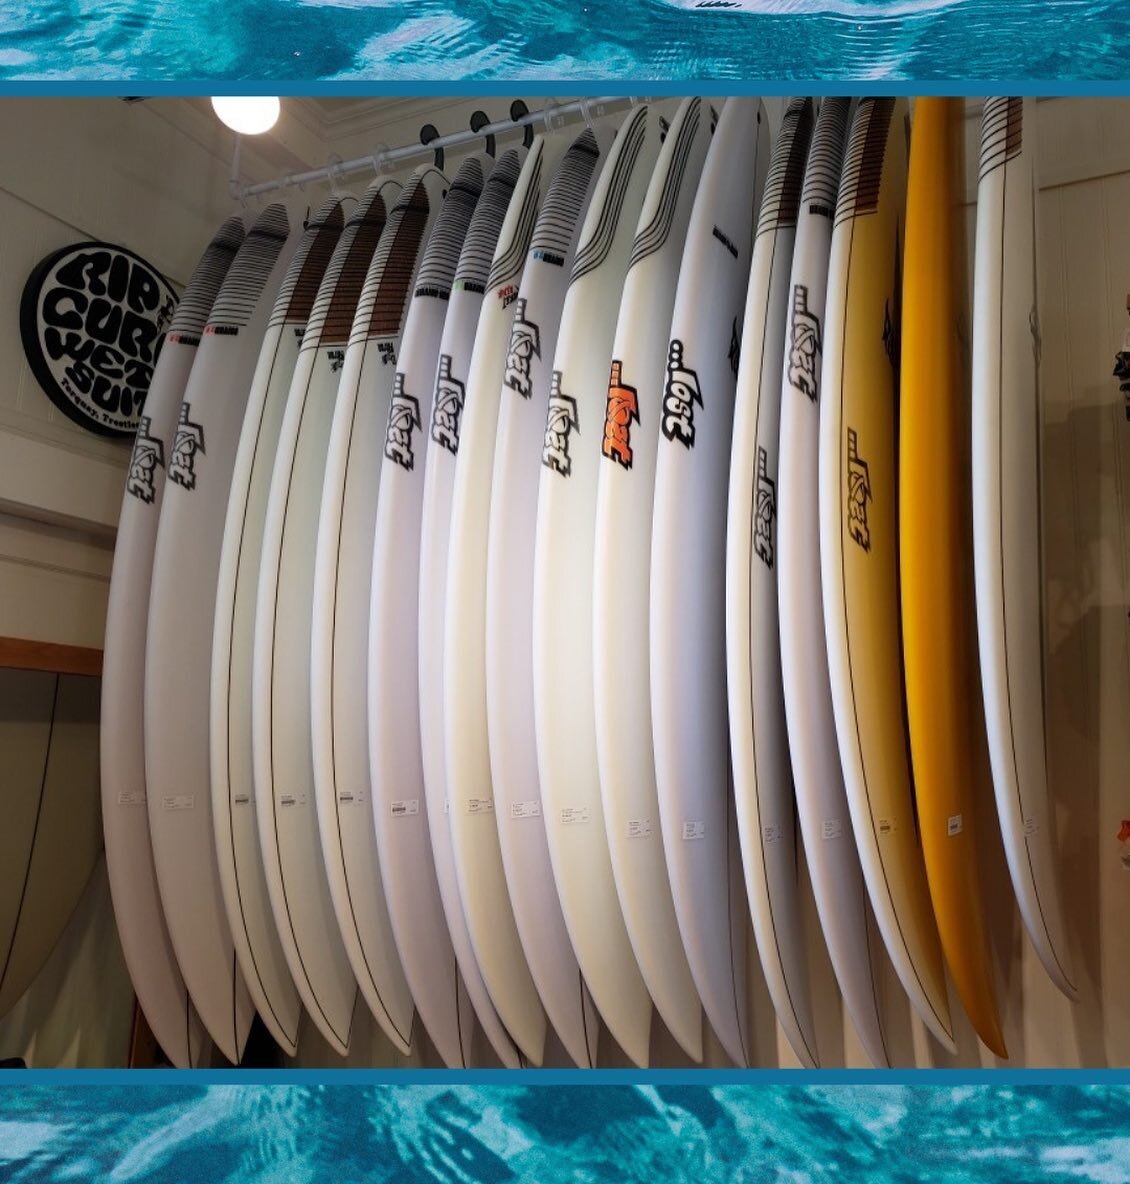 All new @lostsurfboards in! 

Check out full board inventory in store or at link in bio!

#shoplocal #ripcurlhanalei #lostsurfboards